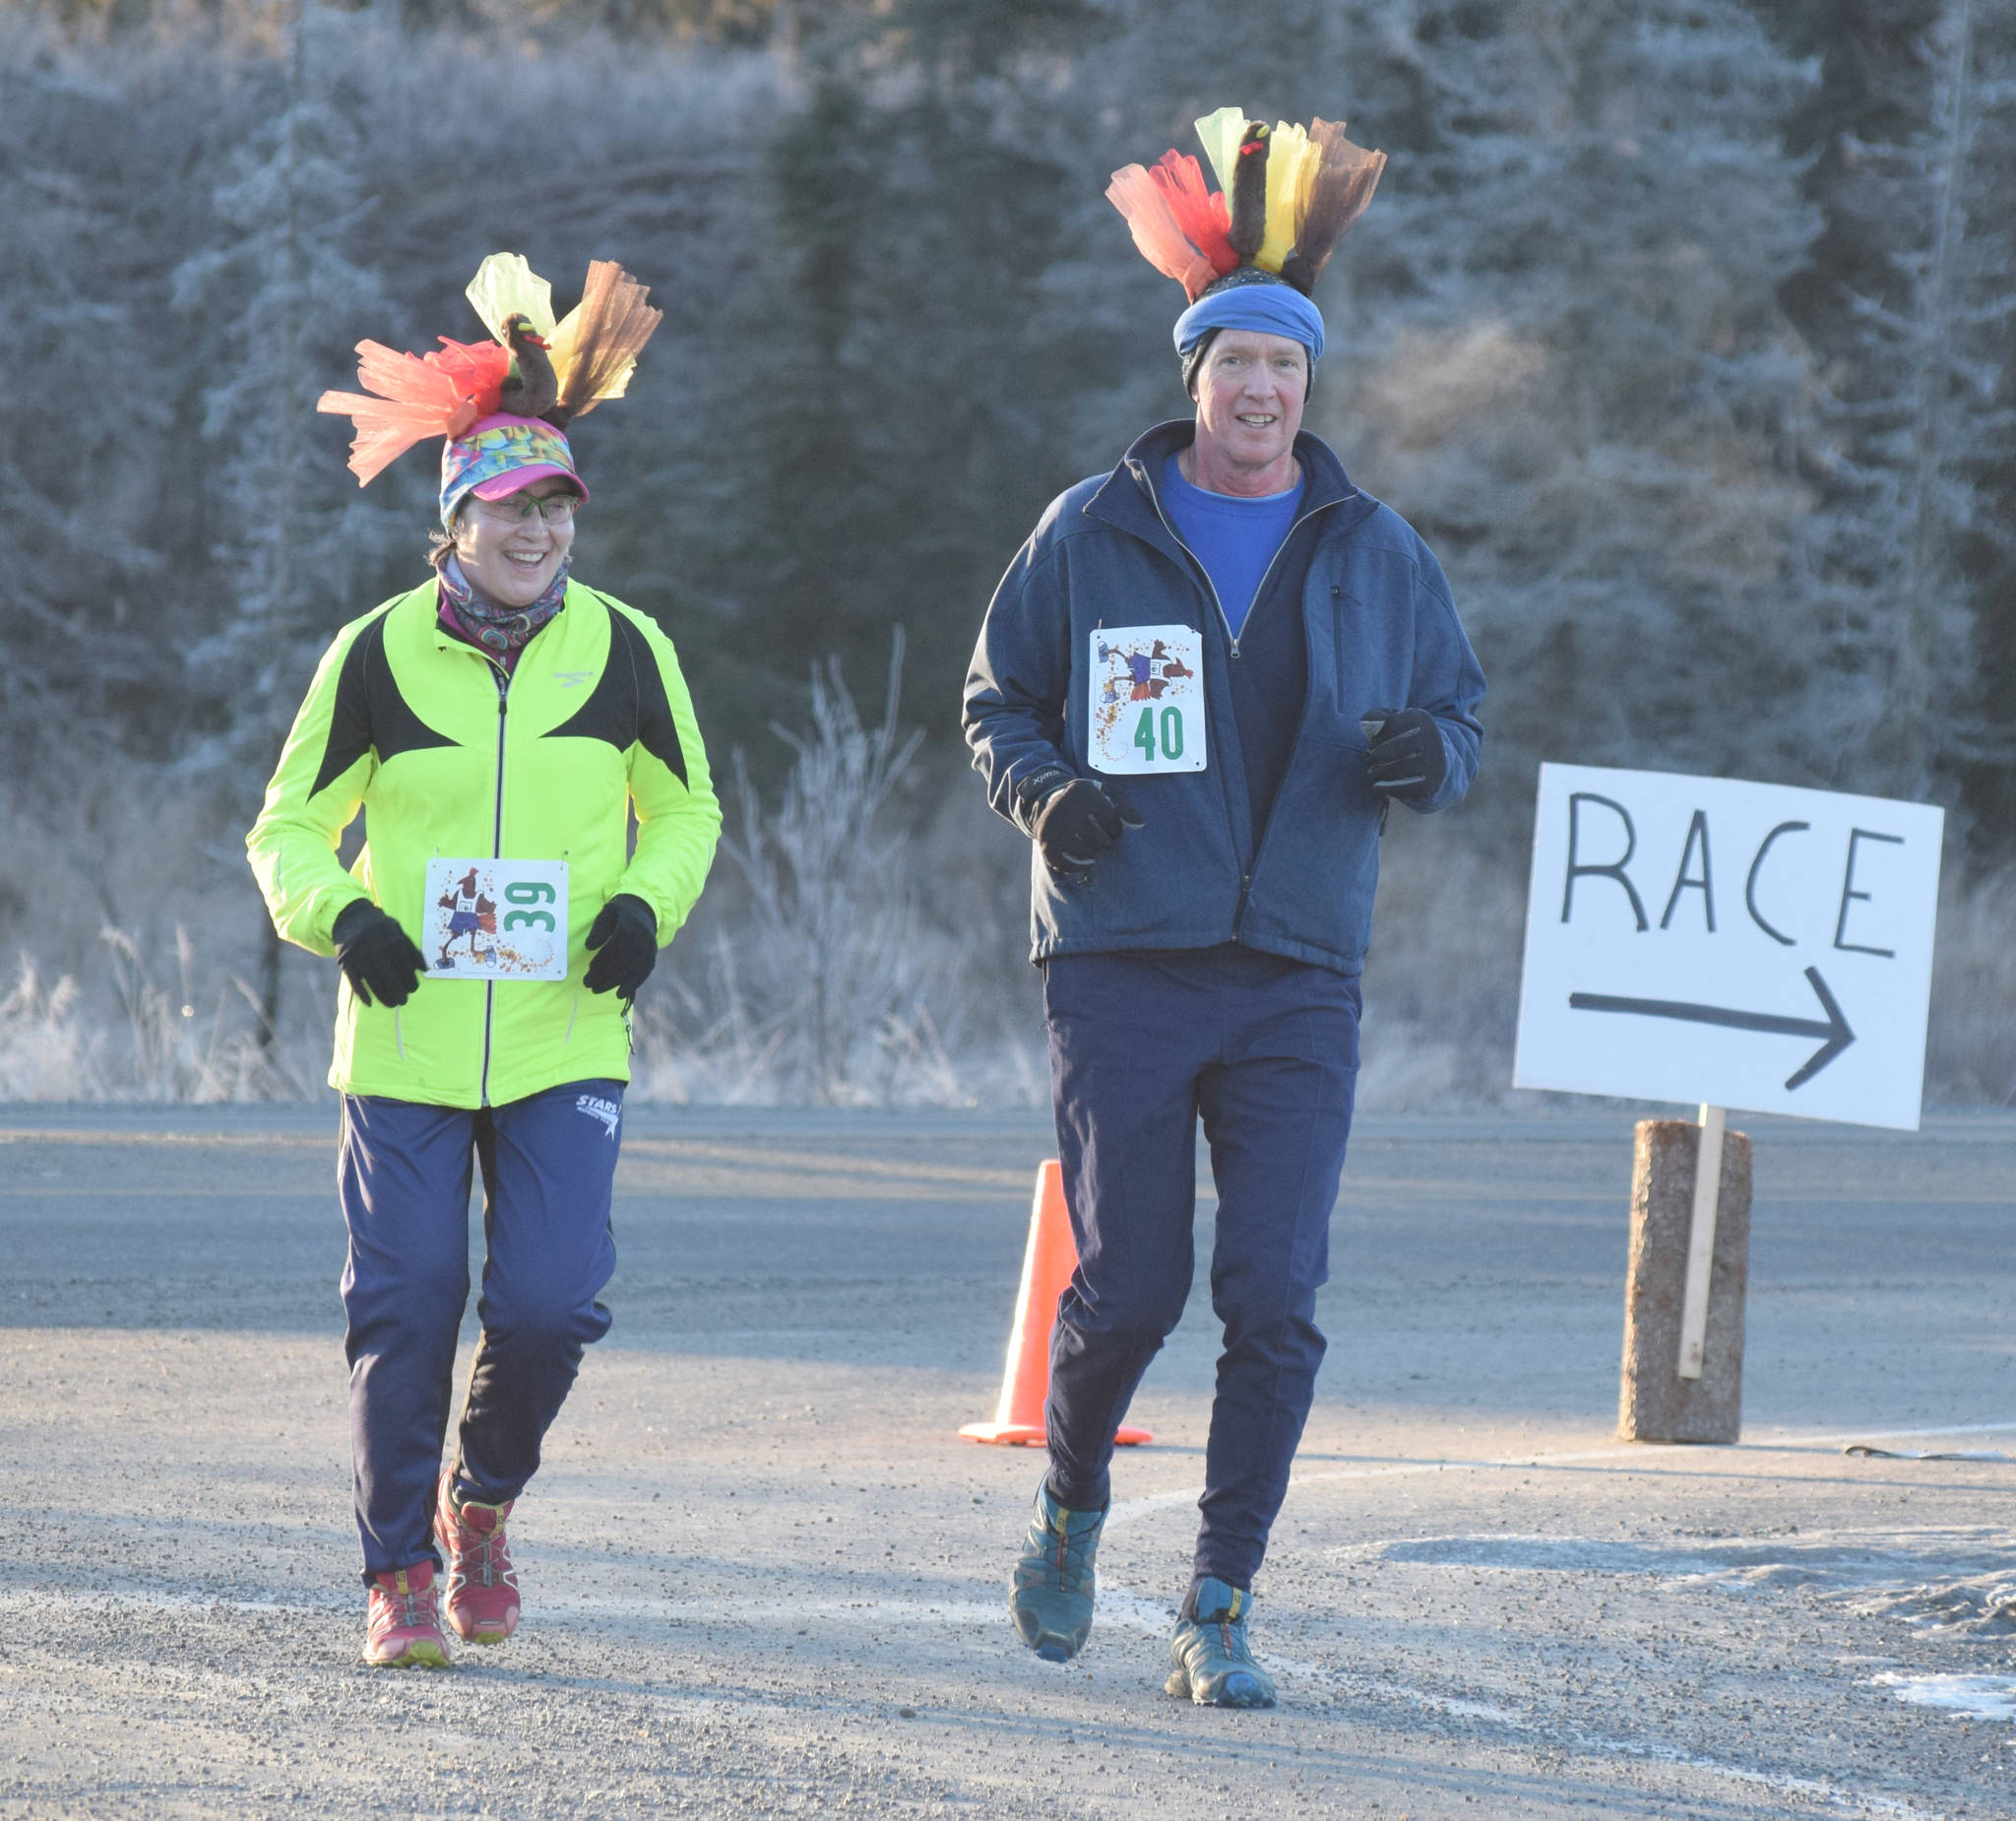 Sheilah-Margaret Pothast and John Pothast of Soldotna near the end of the three-mile run at the Turkey Trot at the Soldotna Regional Sports Complex on Thursday, Nov. 22, 2018. (Photo by Jeff Helminiak/Peninsula Clarion)